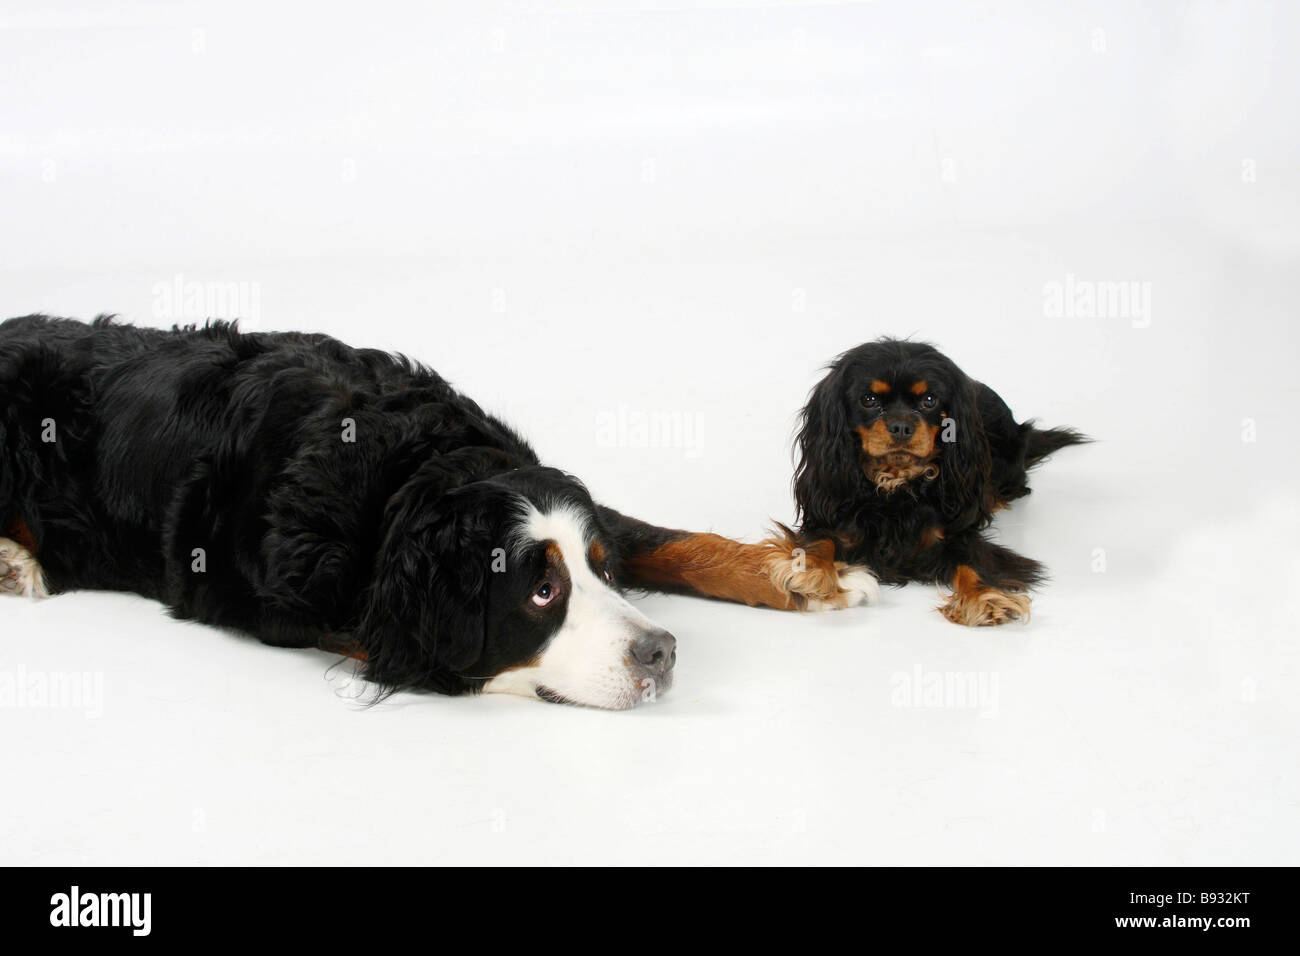 Bernese Mountain Dog and Cavalier King Charles Spaniel black and tan